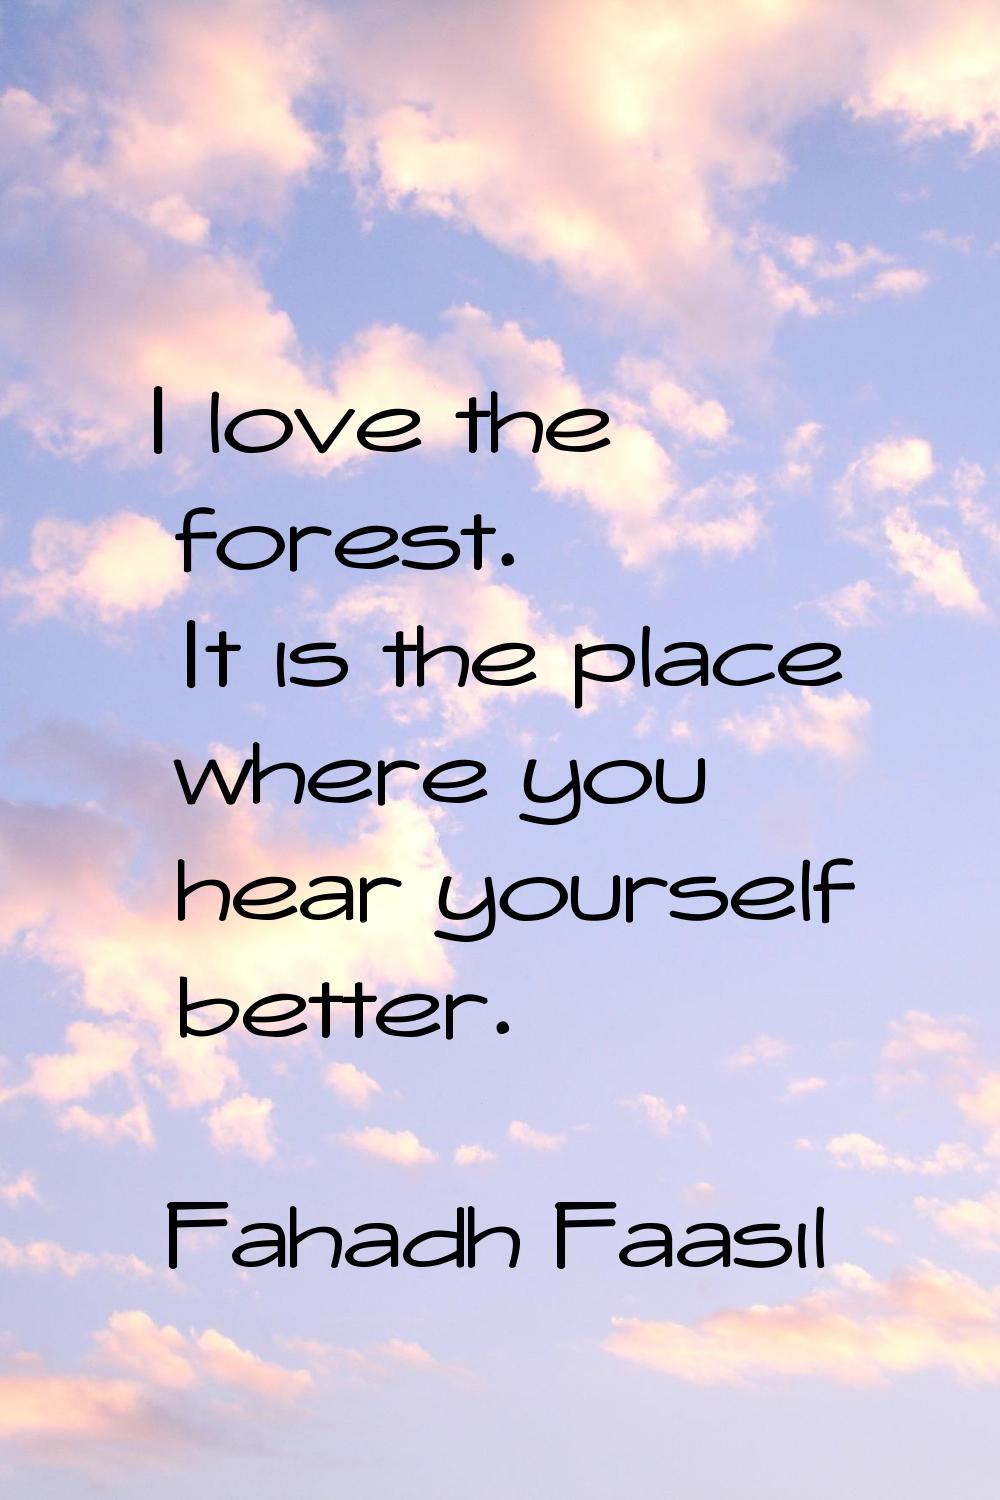 I love the forest. It is the place where you hear yourself better.